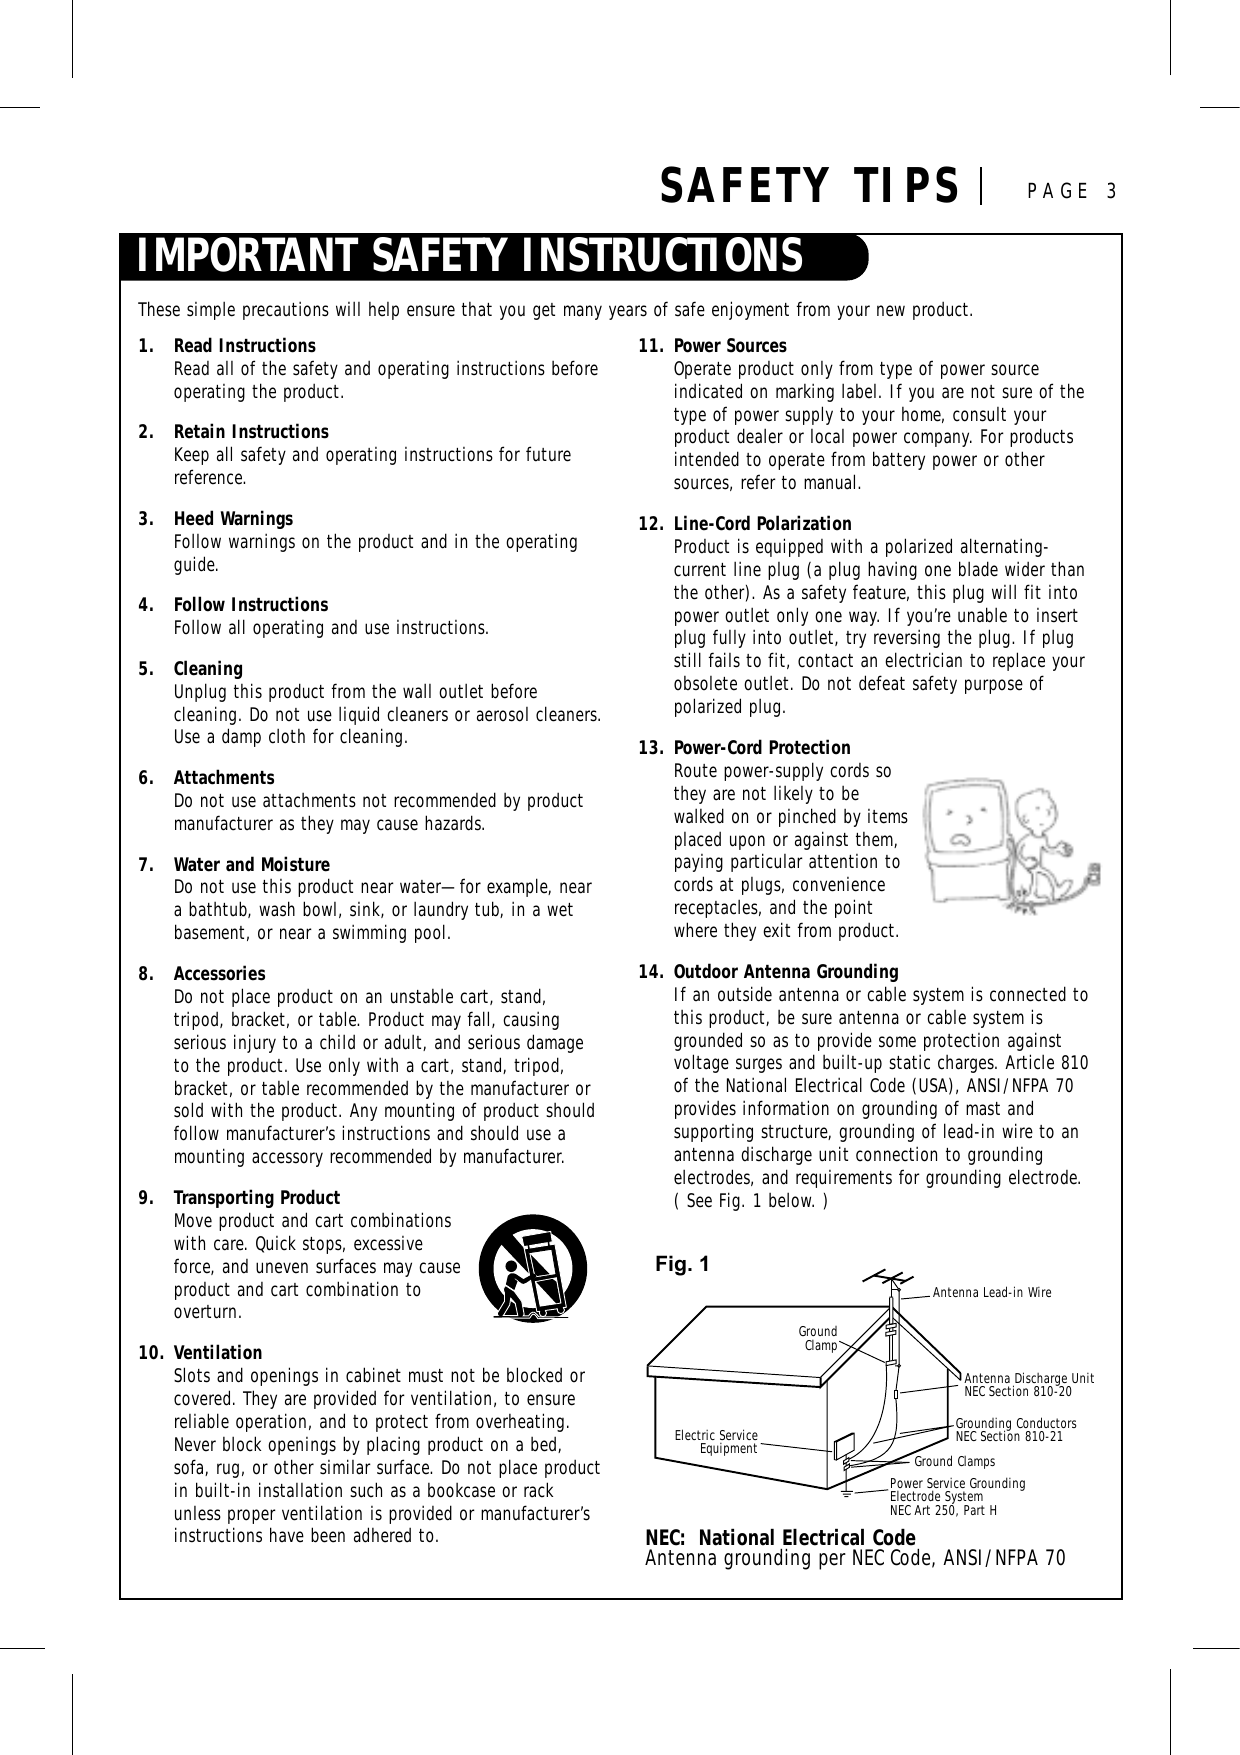 IMPORTANT SAFETY INSTRUCTIONSSAFETY TIPS PAGE 31. Read InstructionsRead all of the safety and operating instructions beforeoperating the product.2. Retain InstructionsKeep all safety and operating instructions for futurereference.3. Heed WarningsFollow warnings on the product and in the operatingguide.4. Follow InstructionsFollow all operating and use instructions.5. CleaningUnplug this product from the wall outlet before cleaning. Do not use liquid cleaners or aerosol cleaners.Use a damp cloth for cleaning.6. AttachmentsDo not use attachments not recommended by productmanufacturer as they may cause hazards.7. Water and MoistureDo not use this product near water—for example, neara bathtub, wash bowl, sink, or laundry tub, in a wetbasement, or near a swimming pool.8. AccessoriesDo not place product on an unstable cart, stand, tripod, bracket, or table. Product may fall, causing serious injury to a child or adult, and serious damageto the product. Use only with a cart, stand, tripod,bracket, or table recommended by the manufacturer orsold with the product. Any mounting of product shouldfollow manufacturer’s instructions and should use amounting accessory recommended by manufacturer.9. Transporting ProductMove product and cart combinationswith care. Quick stops, excessiveforce, and uneven surfaces may causeproduct and cart combination tooverturn.10. VentilationSlots and openings in cabinet must not be blocked orcovered. They are provided for ventilation, to ensurereliable operation, and to protect from overheating.Never block openings by placing product on a bed,sofa, rug, or other similar surface. Do not place productin built-in installation such as a bookcase or rackunless proper ventilation is provided or manufacturer’sinstructions have been adhered to.11. Power Sources Operate product only from type of power source indicated on marking label. If you are not sure of thetype of power supply to your home, consult your product dealer or local power company. For productsintended to operate from battery power or othersources, refer to manual.12. Line-Cord PolarizationProduct is equipped with a polarized alternating-current line plug (a plug having one blade wider thanthe other). As a safety feature, this plug will fit intopower outlet only one way. If you’re unable to insertplug fully into outlet, try reversing the plug. If plugstill fails to fit, contact an electrician to replace yourobsolete outlet. Do not defeat safety purpose of polarized plug.13. Power-Cord ProtectionRoute power-supply cords sothey are not likely to bewalked on or pinched by itemsplaced upon or against them,paying particular attention tocords at plugs, conveniencereceptacles, and the pointwhere they exit from product.14. Outdoor Antenna GroundingIf an outside antenna or cable system is connected tothis product, be sure antenna or cable system isgrounded so as to provide some protection againstvoltage surges and built-up static charges. Article 810of the National Electrical Code (USA), ANSI/NFPA 70provides information on grounding of mast and supporting structure, grounding of lead-in wire to anantenna discharge unit connection to grounding electrodes, and requirements for grounding electrode. ( See Fig. 1 below. )These simple precautions will help ensure that you get many years of safe enjoyment from your new product.Antenna Lead-in WireAntenna Discharge UnitNEC Section 810-20 Grounding ConductorsNEC Section 810-21Ground ClampsPower Service Grounding Electrode System NEC Art 250, Part HGroundClampElectric ServiceEquipmentNEC:  National Electrical CodeAntenna grounding per NEC Code, ANSI/NFPA 70Fig. 1